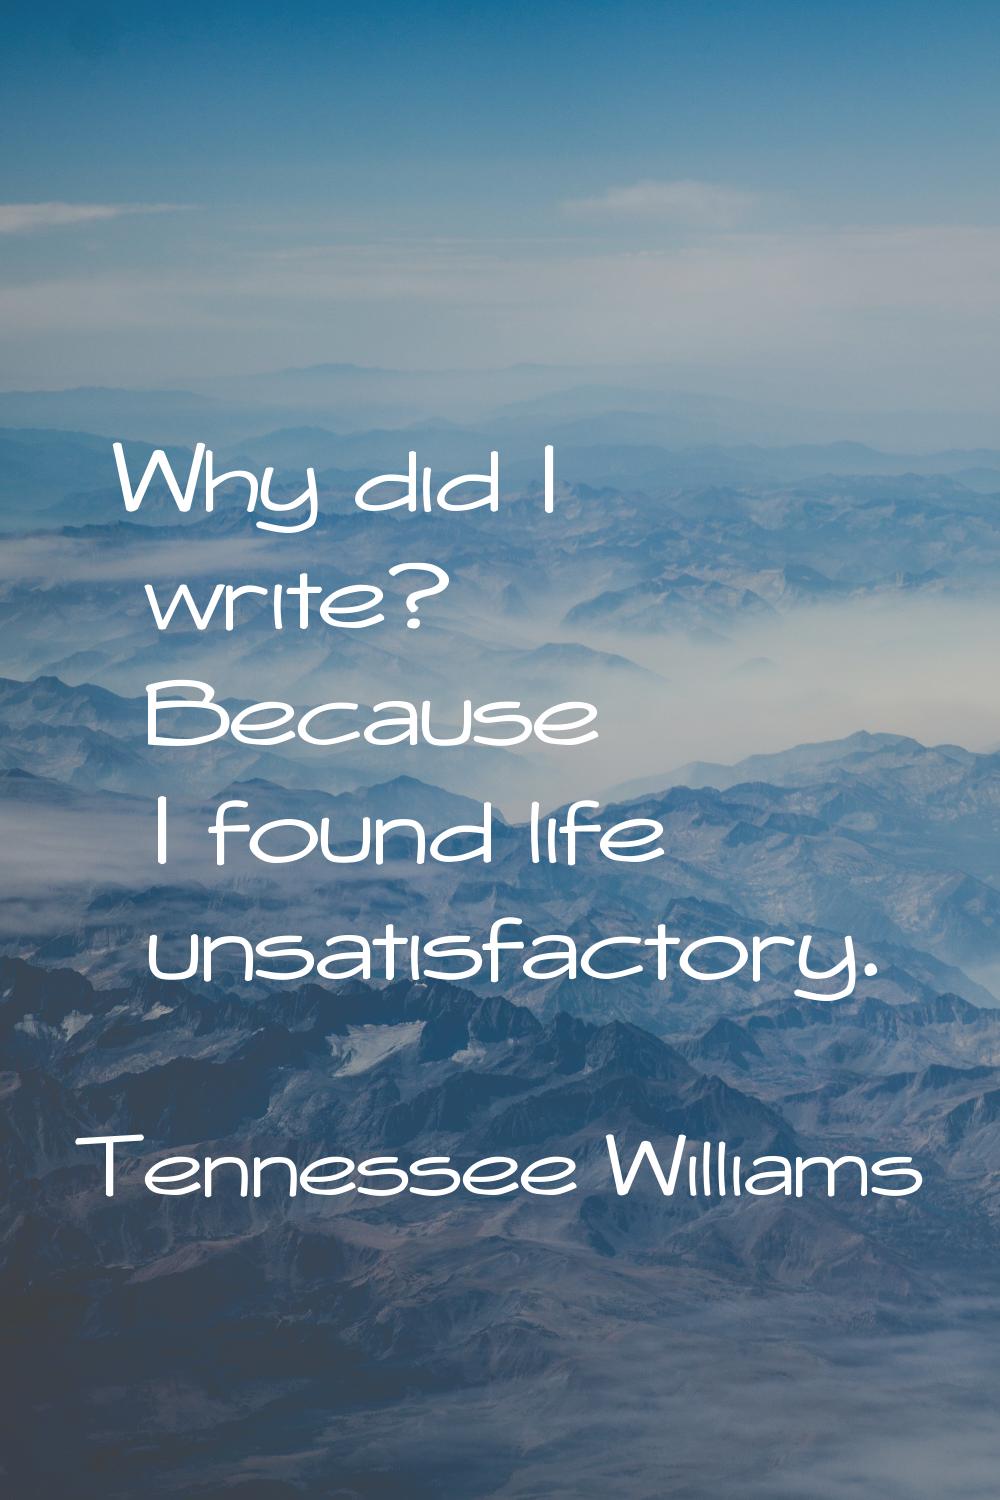 Why did I write? Because I found life unsatisfactory.